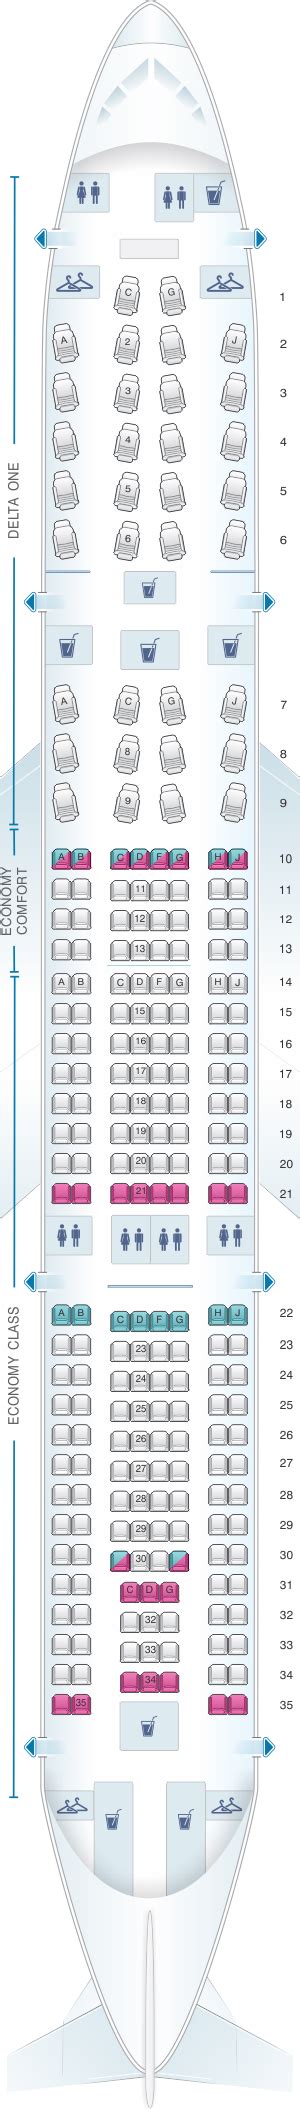 50 Delta Airbus A319 Seating Chart Pictures Airbus Way